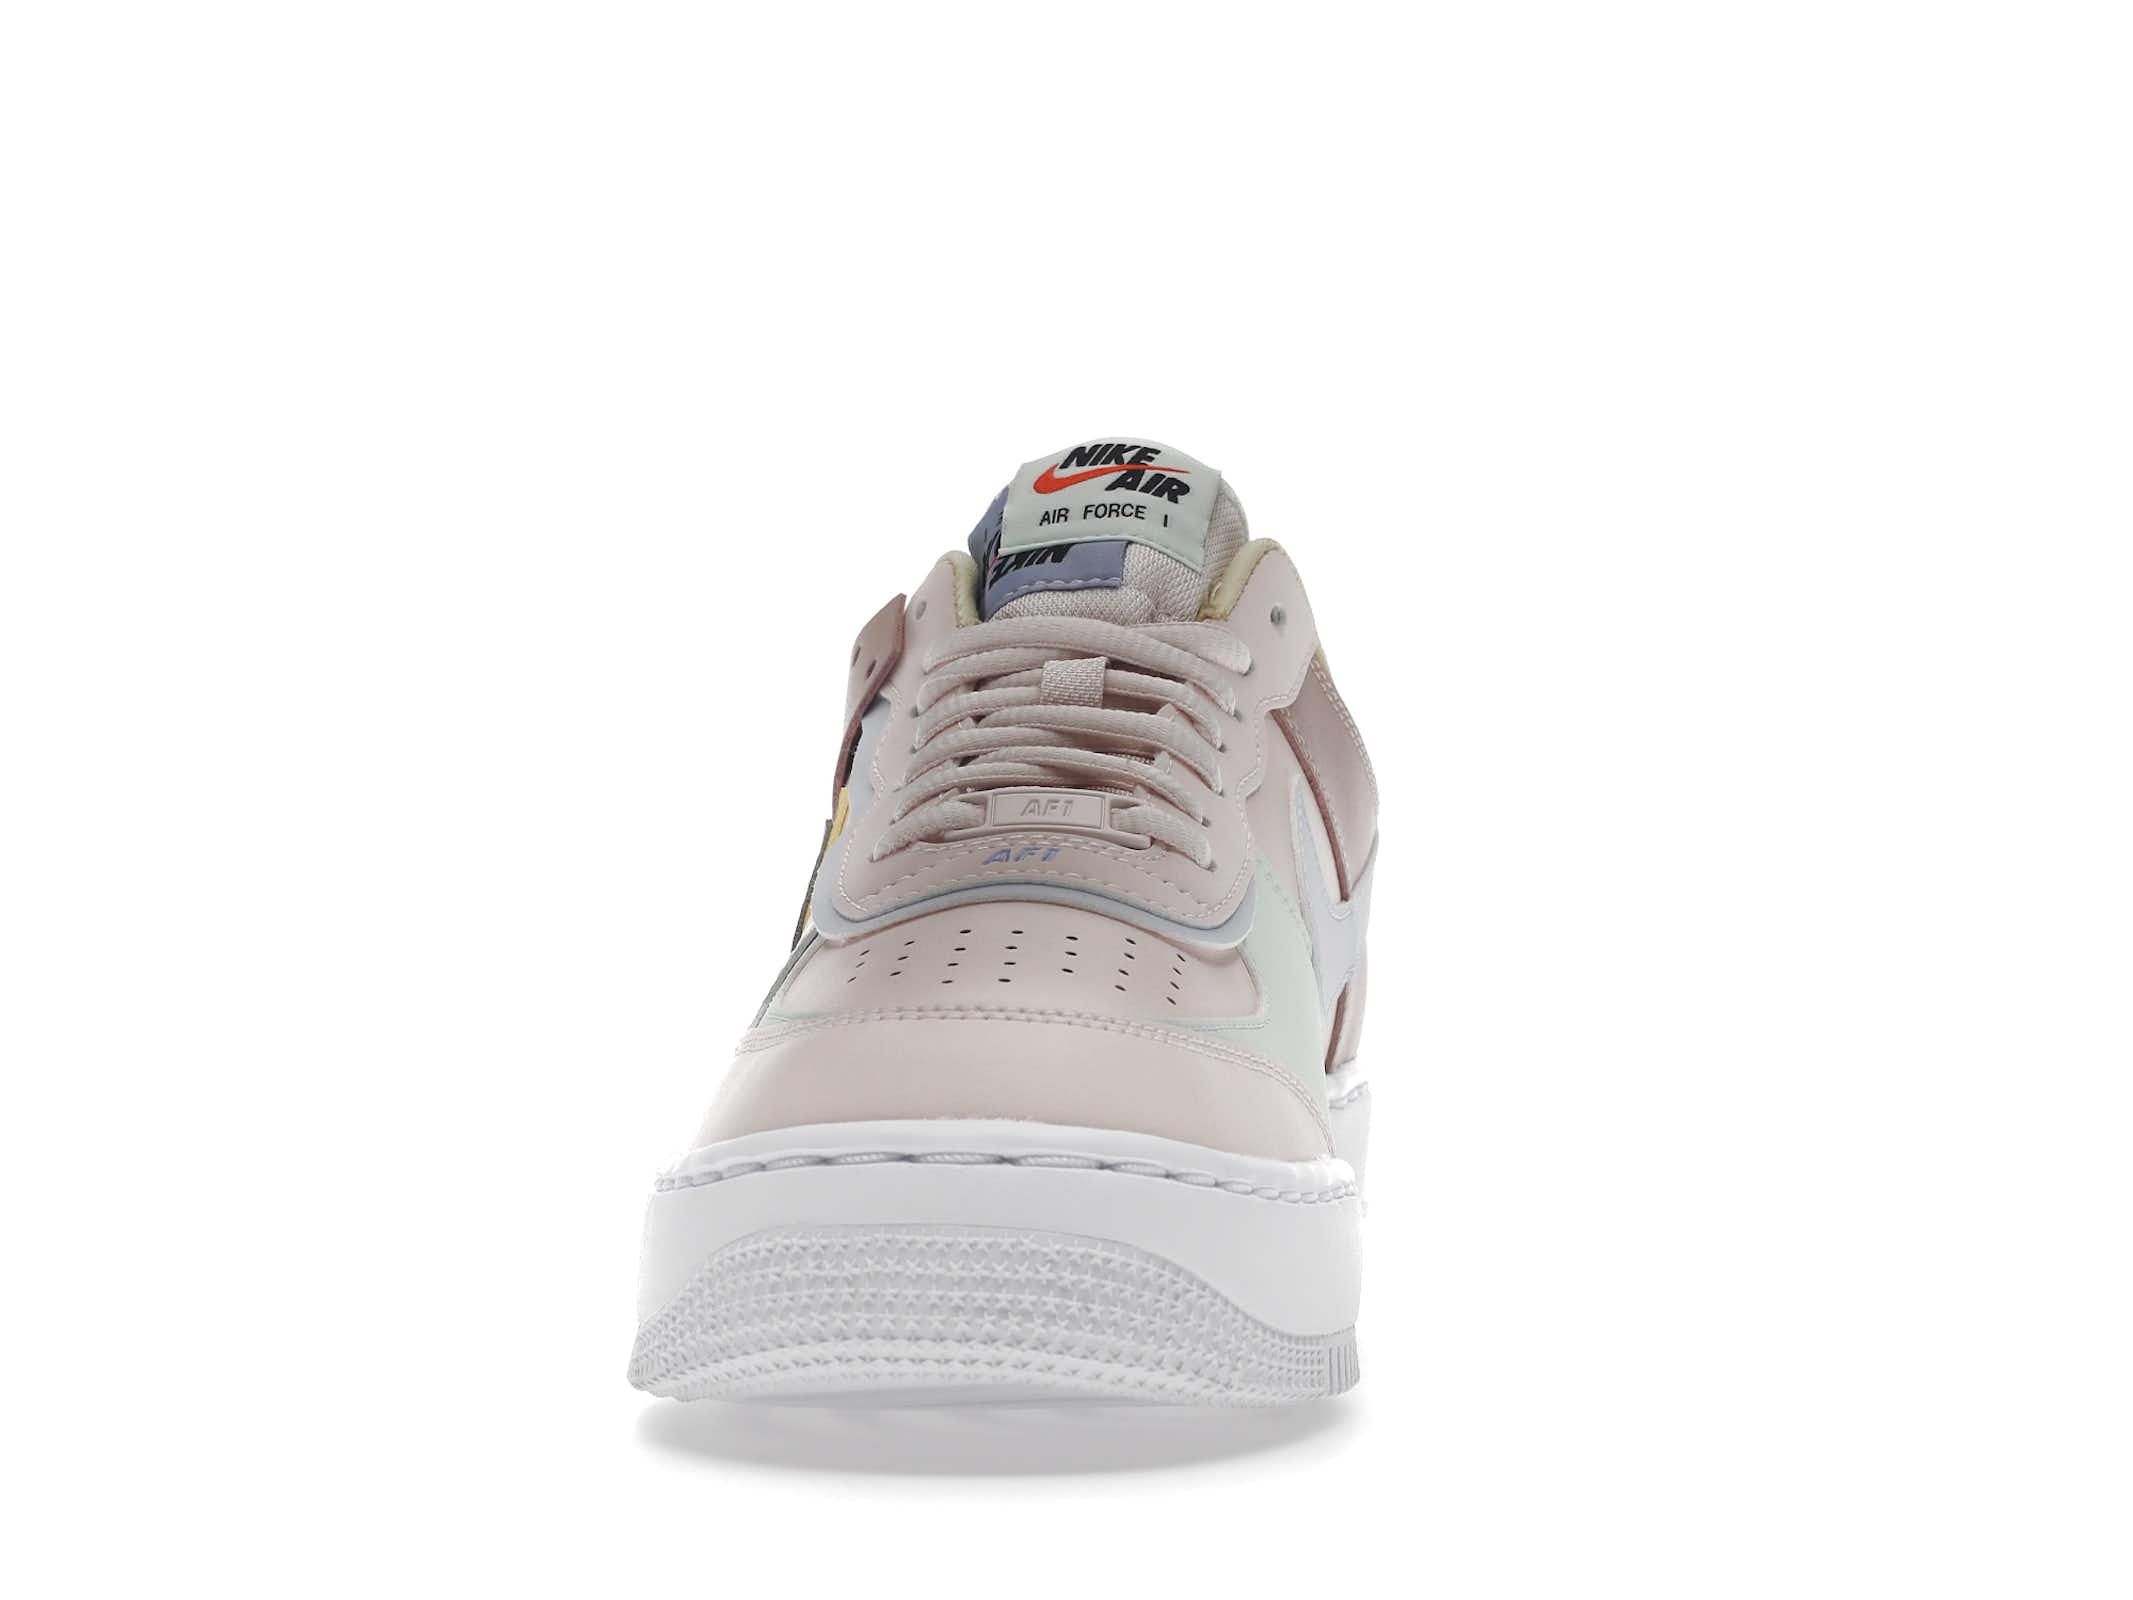 Nike Air Force 1 Low ShadowLight Soft Pink (Women's) | StockX